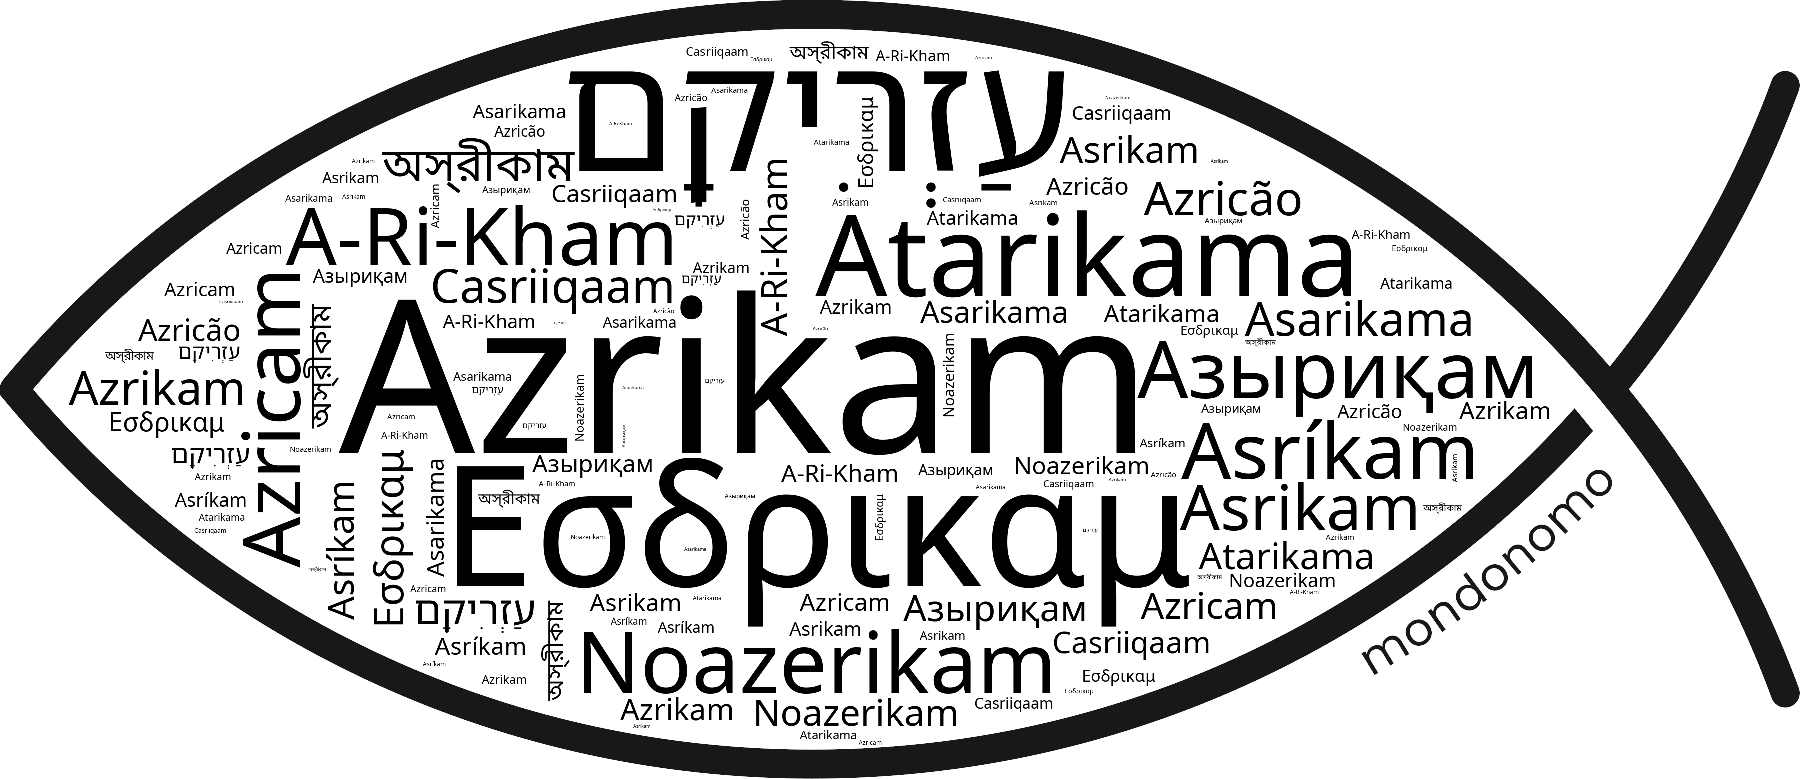 Name Azrikam in the world's Bibles